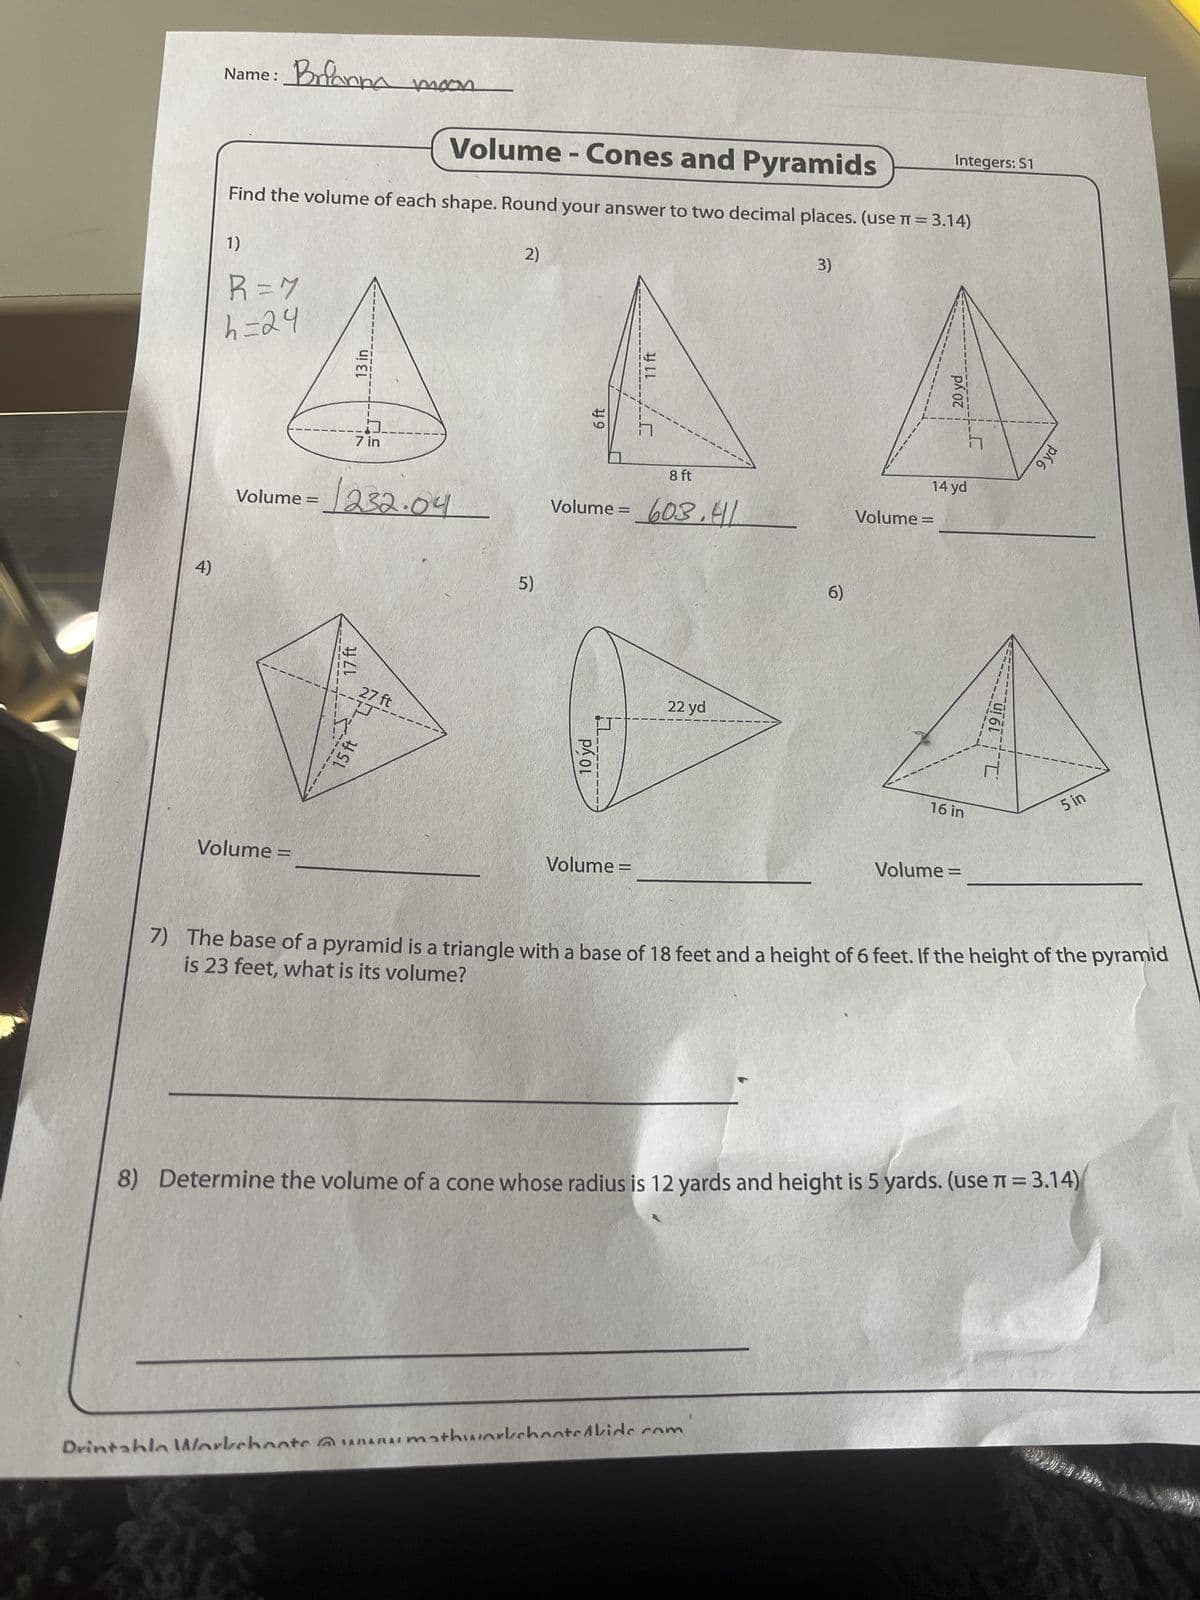 4)
Volume
=
Name:
Brianna
moon
R = 7
h=24
Volume - Cones and Pyramids
Find the volume of each shape. Round your answer to two decimal places. (use π = 3.14)
1)
2)
3)
13 in
ה
7 in
Volume =
1232.04
15ft
17 ft
27 ft
5)
10 yd
Volume =
6 ft
11 ft
8 ft
Volume = 603.41
22 yd
6)
Volume =
16 in
Volume =
14 yd
119 in
20 yd
5 in
7) The base of a pyramid is a triangle with a base of 18 feet and a height of 6 feet. If the height of the pyramid
is 23 feet, what is its volume?
8) Determine the volume of a cone whose radius is 12 yards and height is 5 yards. (use π = 3.14)
Drintahla Workchoats www.mathworkshooted kide.com
Integers: S1
9 yd